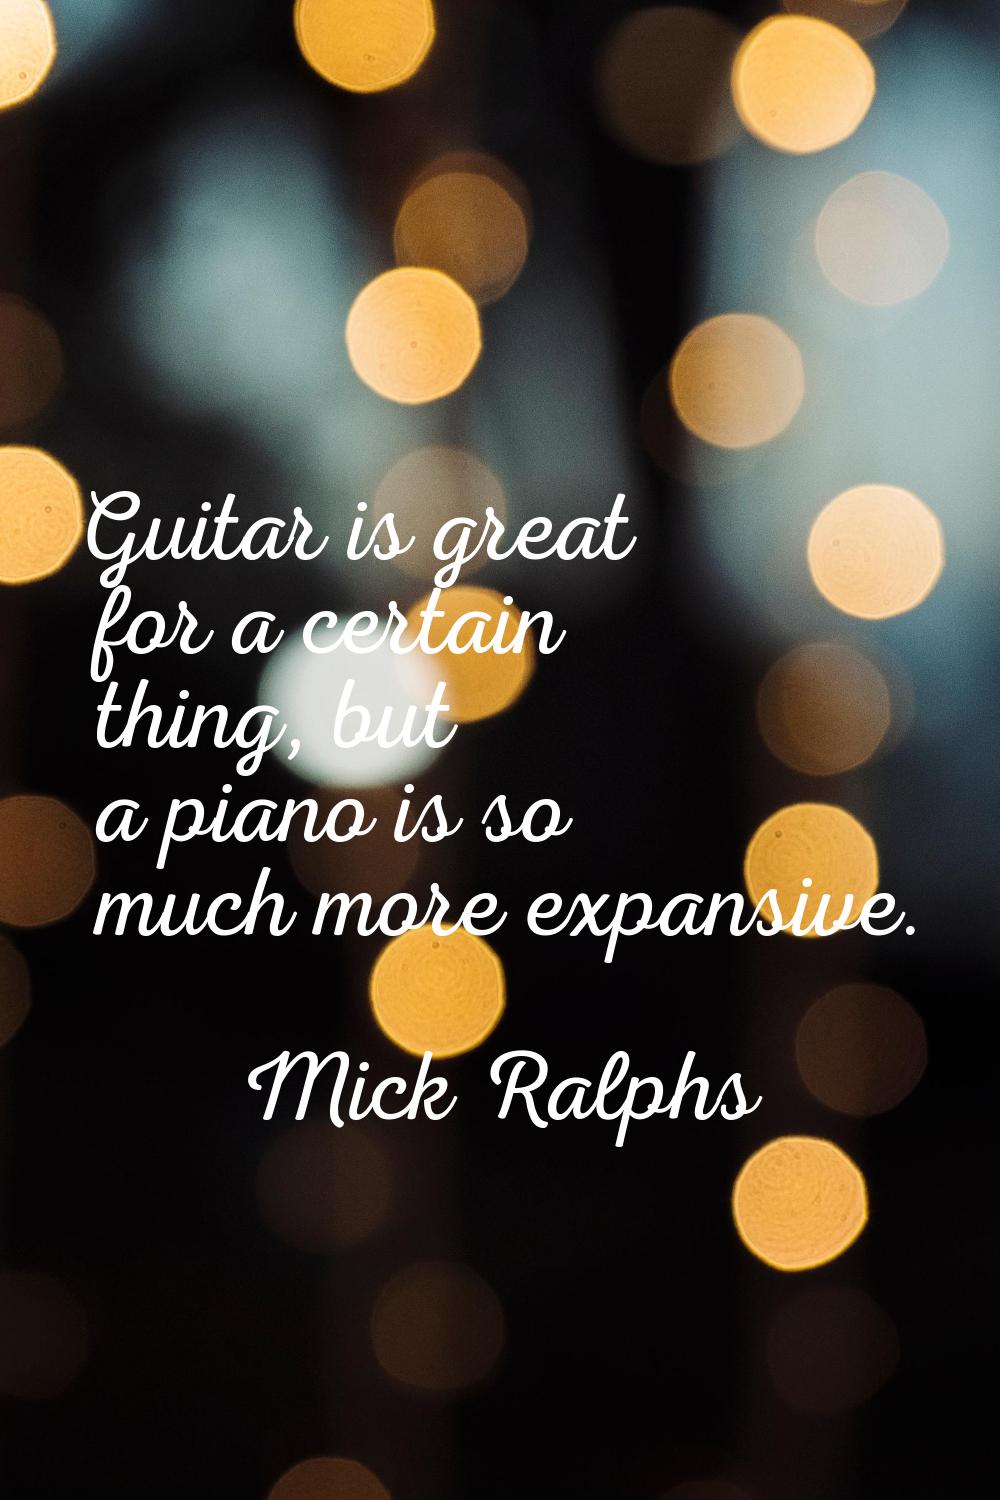 Guitar is great for a certain thing, but a piano is so much more expansive.